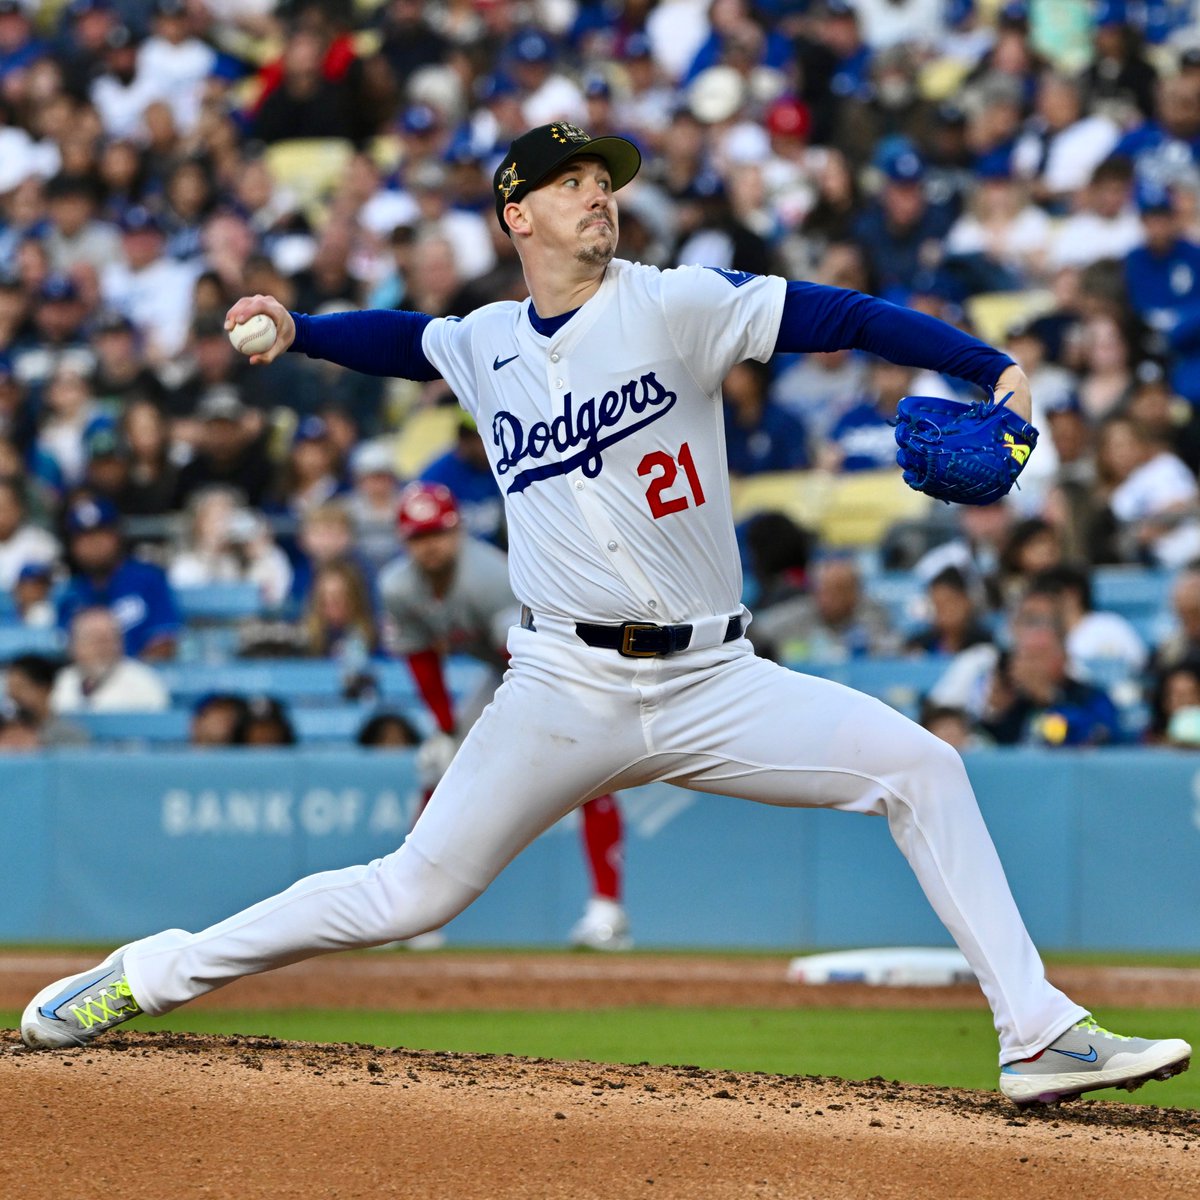 Walker Buehler was outstanding tonight: 6 IP, 3 H, 0 BB, 7 Ks, 0 R, 78 pitches/55 strikes, 35 CSW%